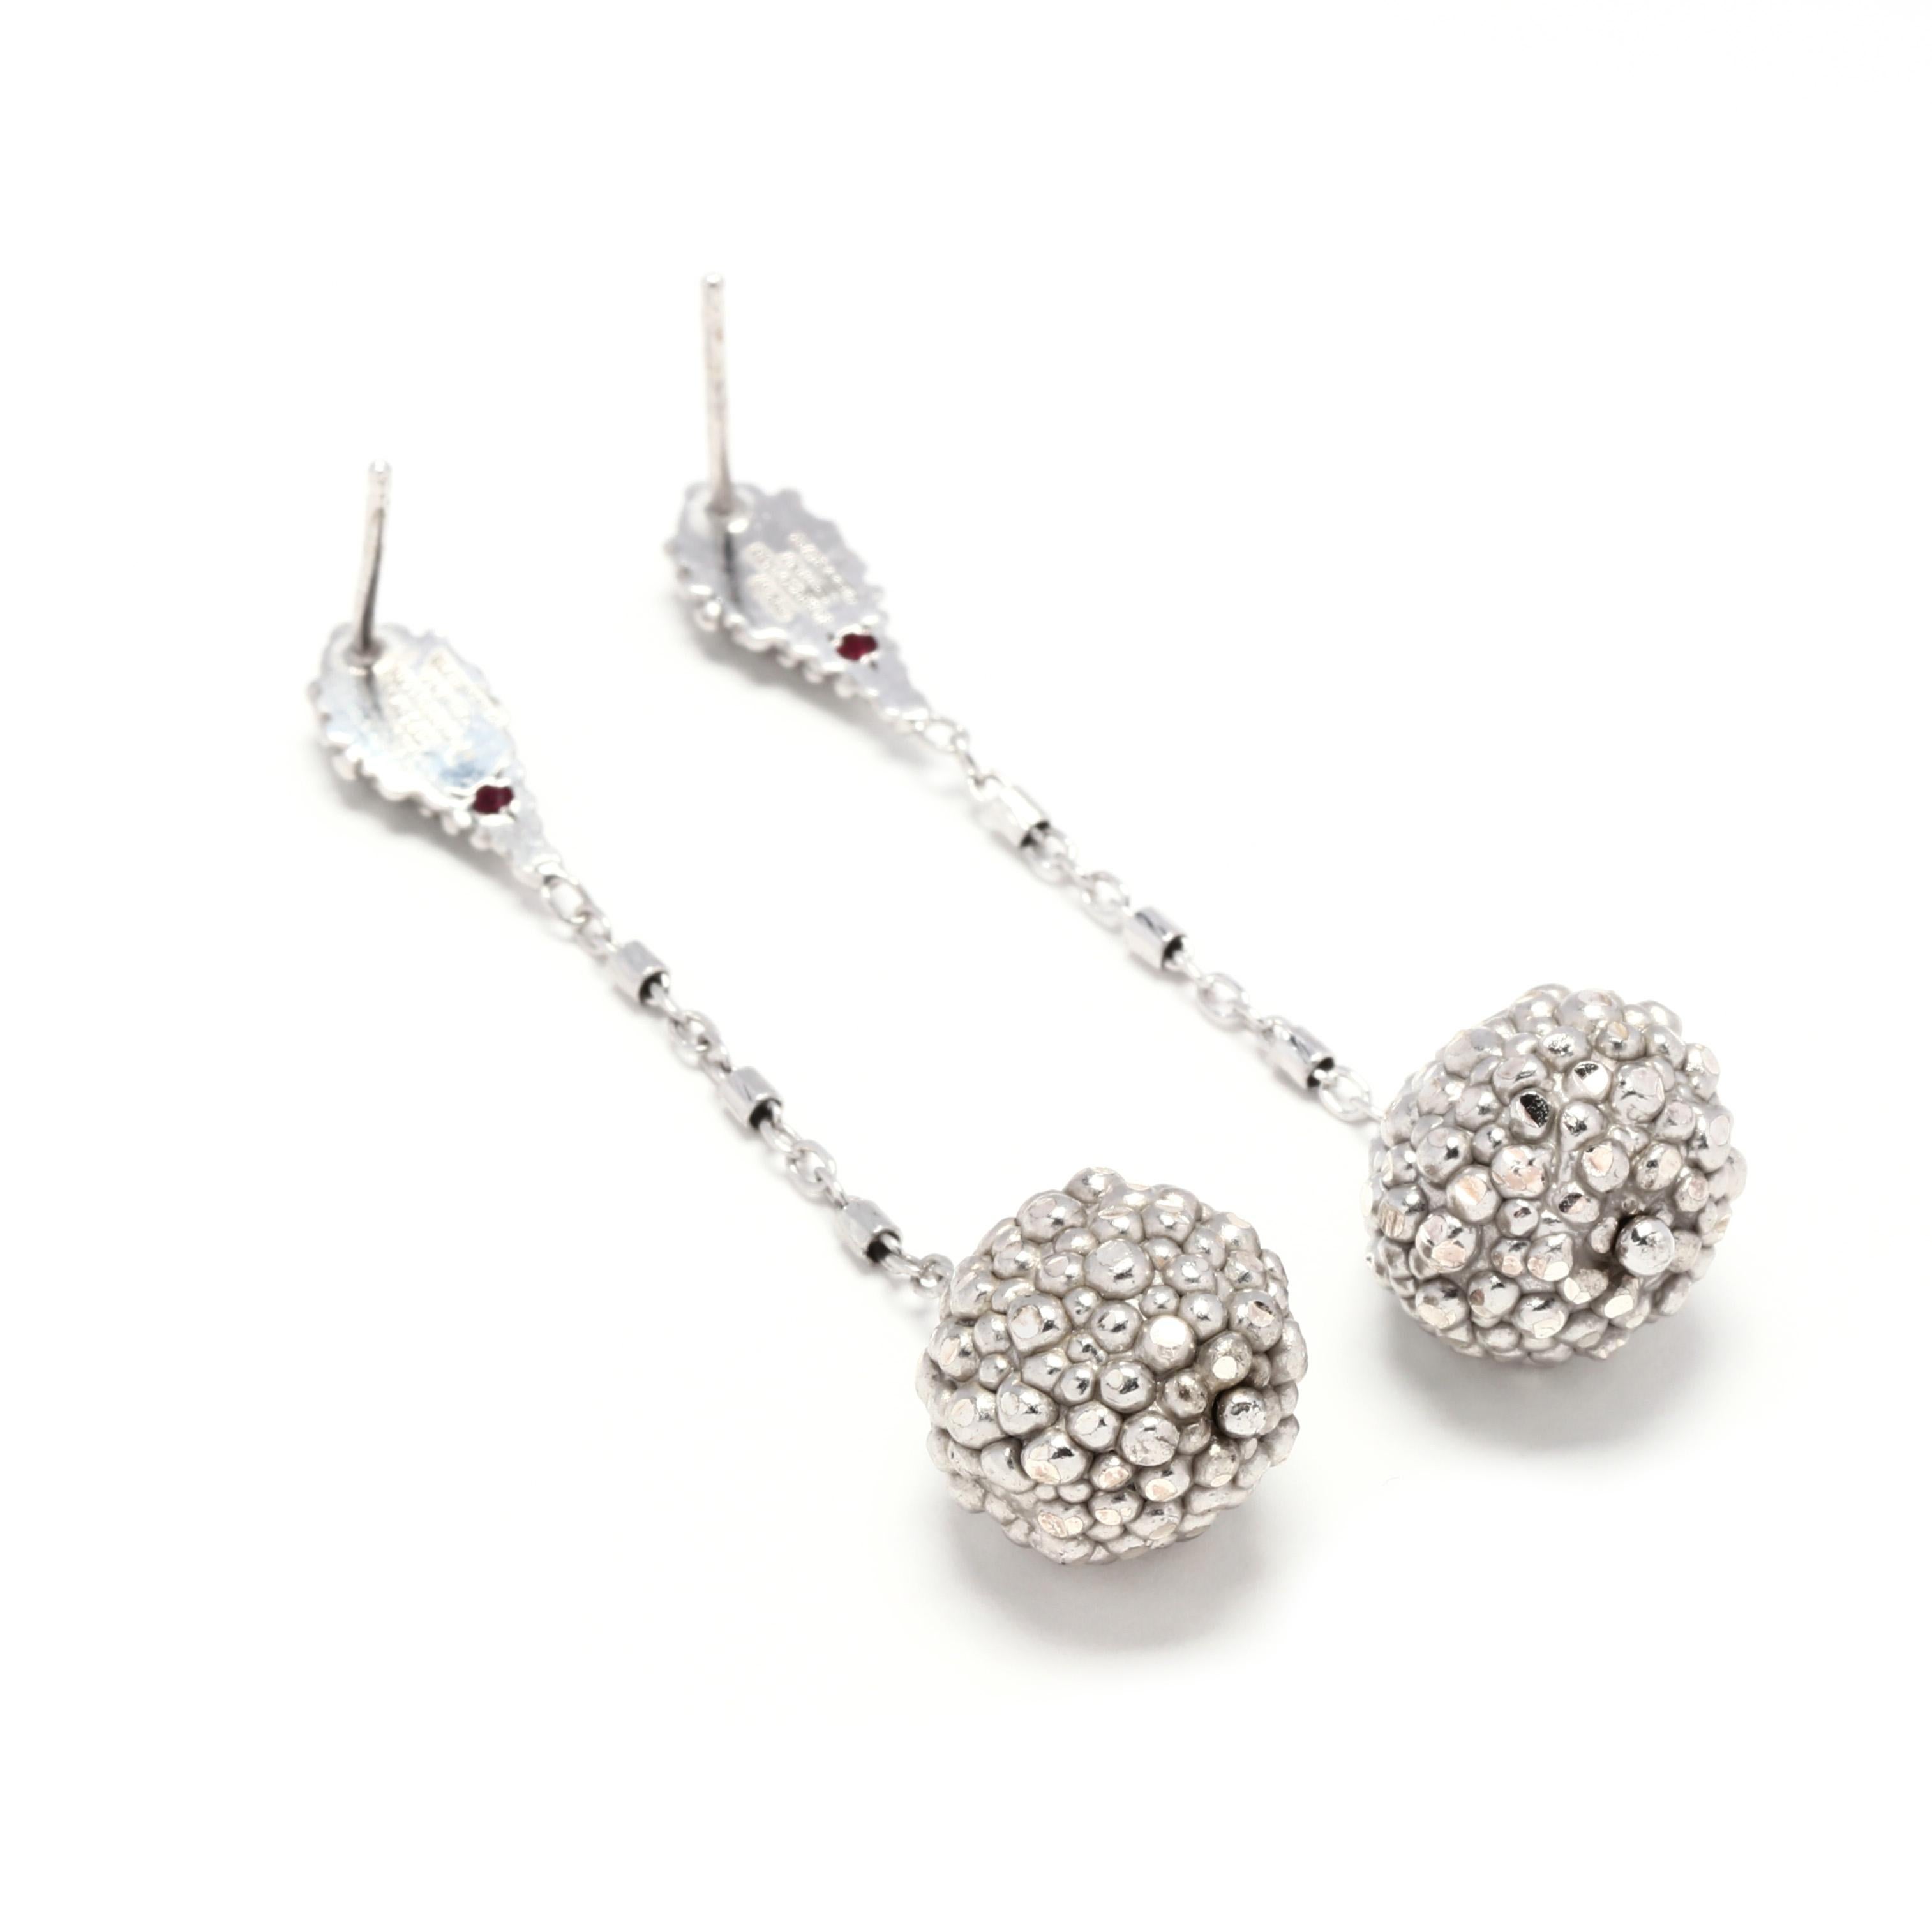 A pair of sterling silver ball dangle earrings, TFS by Roberto Coin. These earrings feature a beaded pear shape stud with a round cut ruby on the back suspending a large beaded ball dangle.



Length: 2.25 in.



Width: 1/2 in.



Weight: 7.1 grams